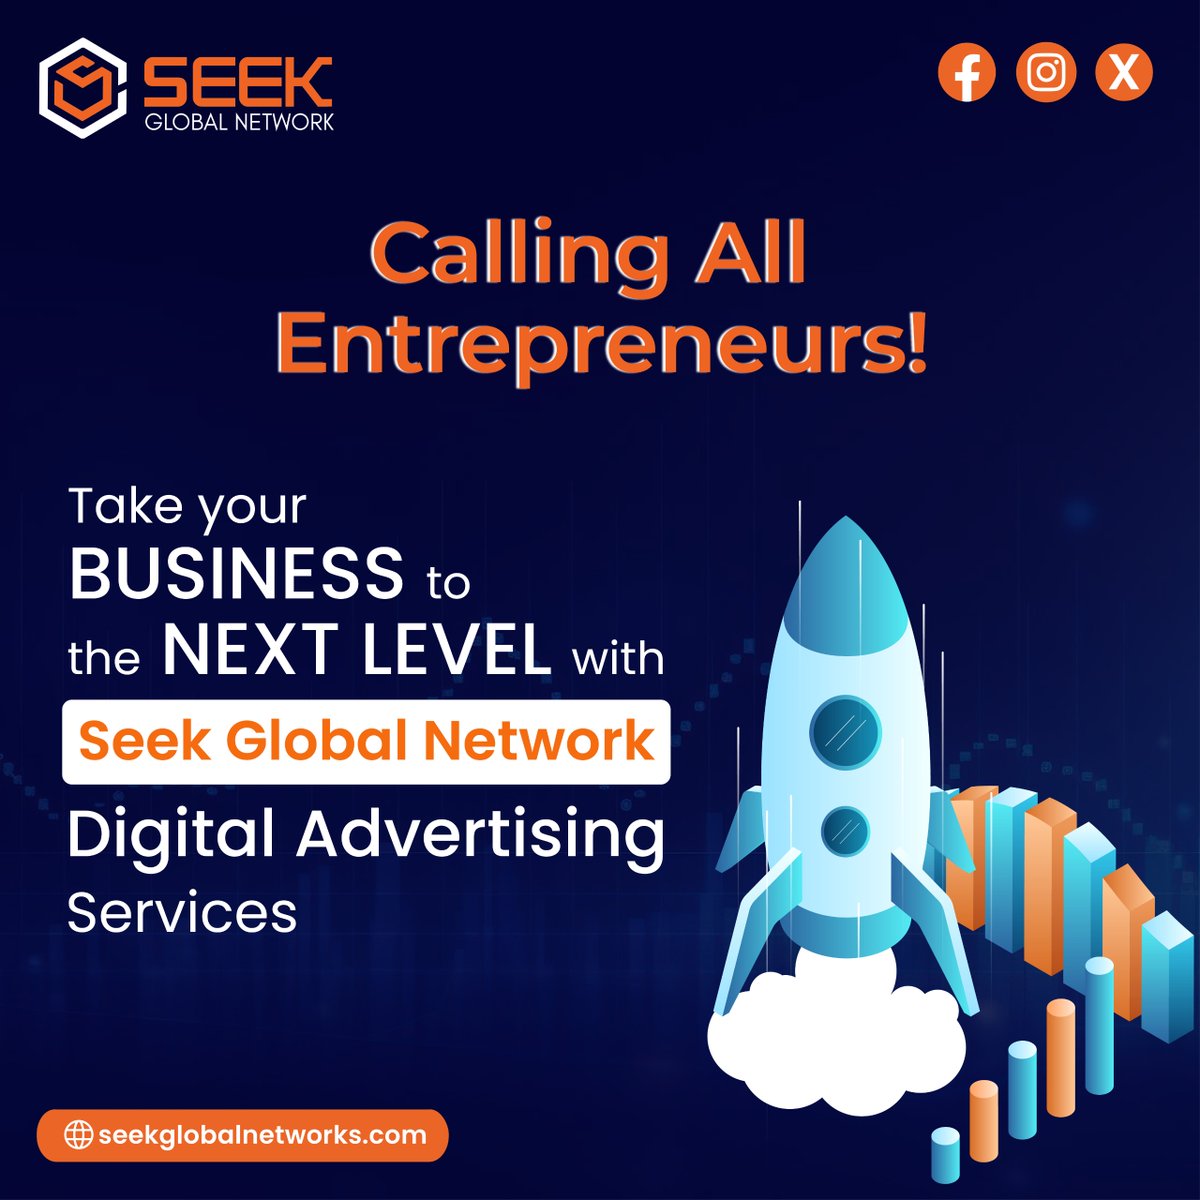 Calling all entrepreneurs! Elevate your business to the next level with Seek Global Network's cutting-edge digital advertising services. 
Stay tuned for more details: 🌐 seekglobalnetwork.com
#EntrepreneurialGrowth #BusinessAcceleration #DigitalAdvertising #SeekGlobalNetwork